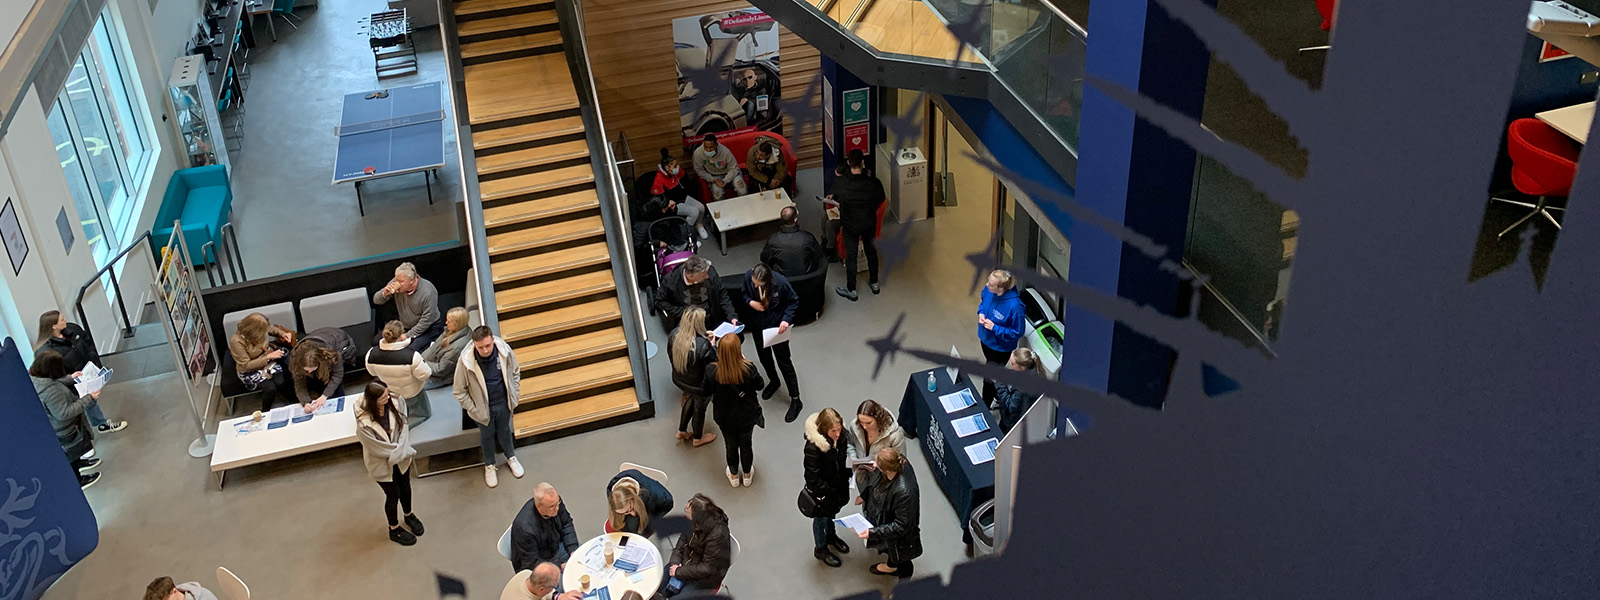 Students, staff, and parents chatting in the business school atrium